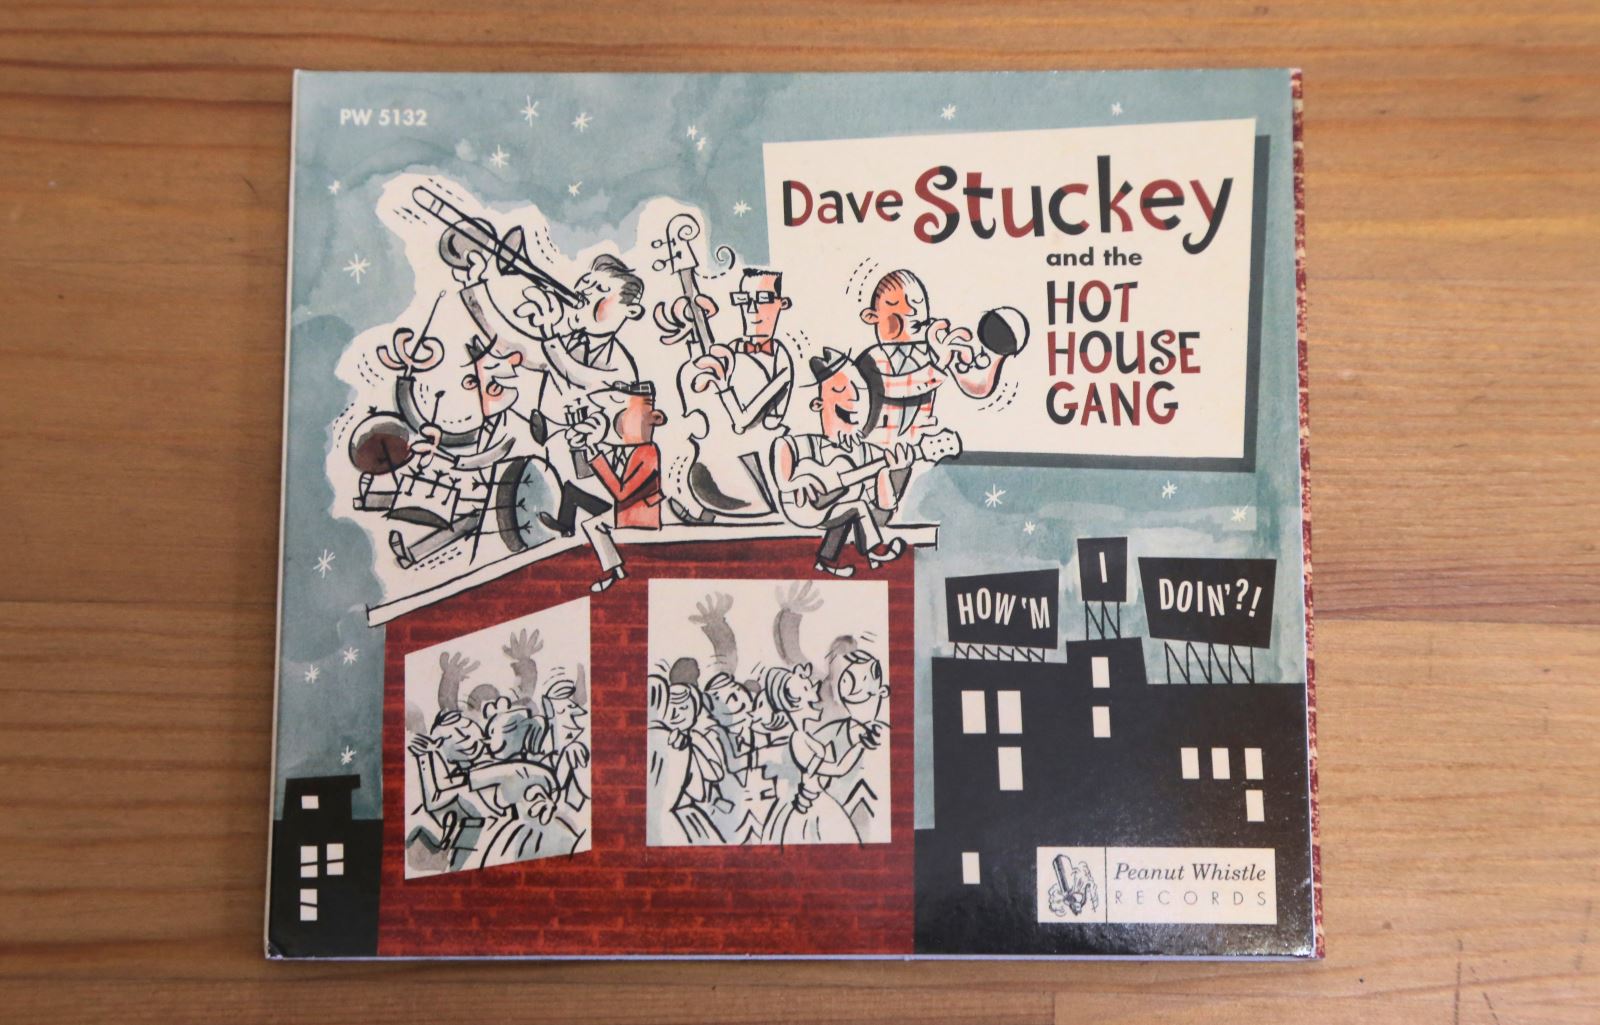 Album Review: Dave Stuckey and the Hot House Gang’s “How’m I Doin’?!”